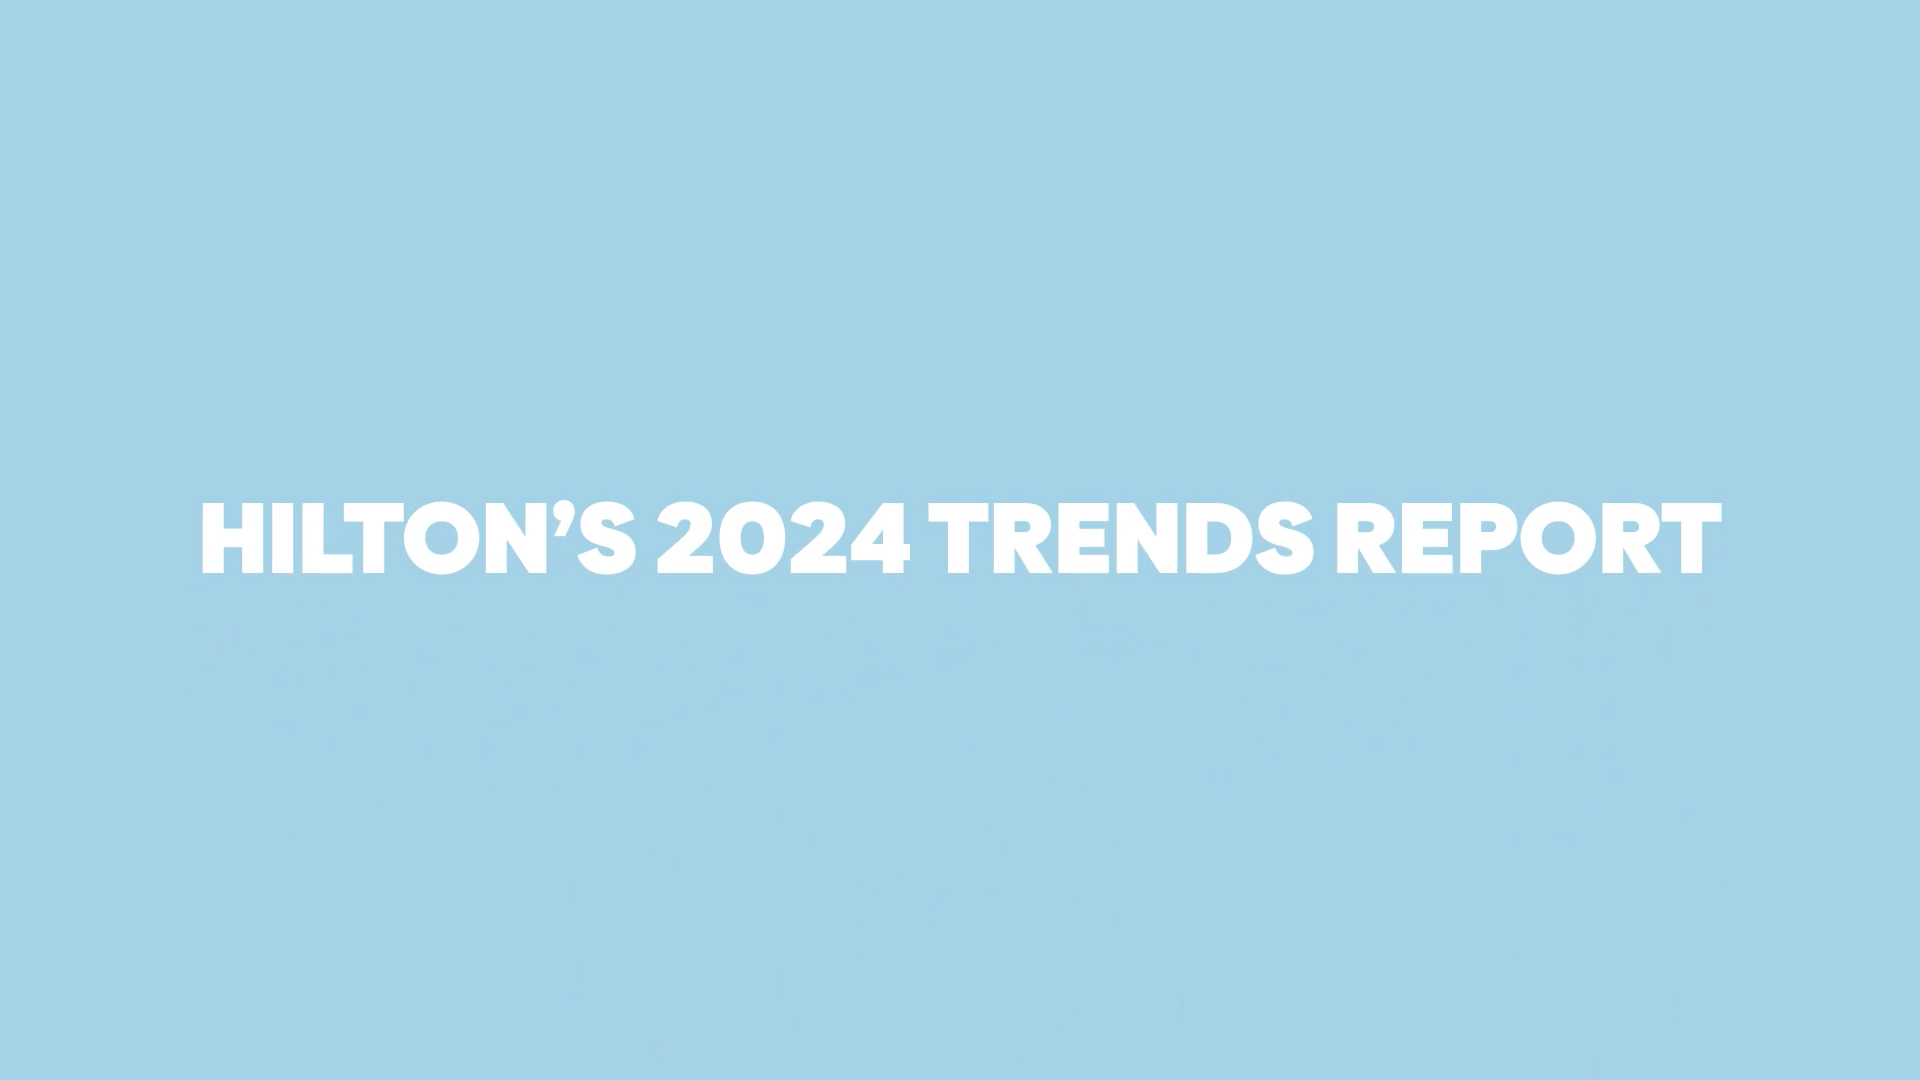 Hilton’s 2024 Trends Report predicts travelers of all ages will prioritize rest and relaxation, value connectivity and personalization, seek out culture and unique experiences and embrace new business travel trends as the travel boom continues.